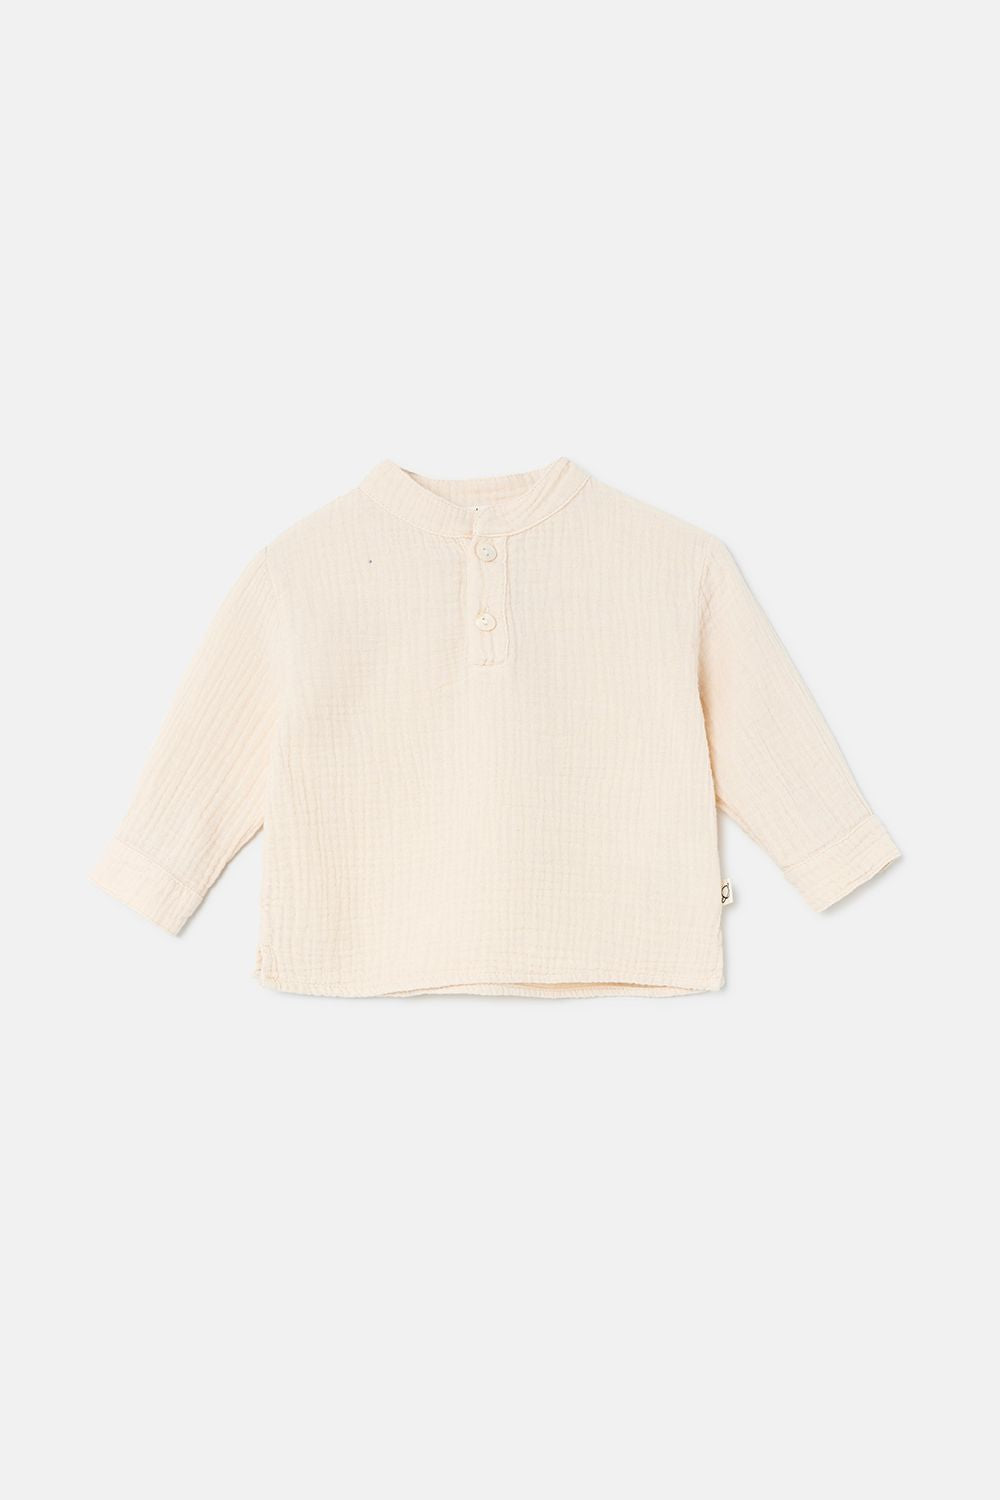 My Little Cozmo - andres230 - woven shirt - stone